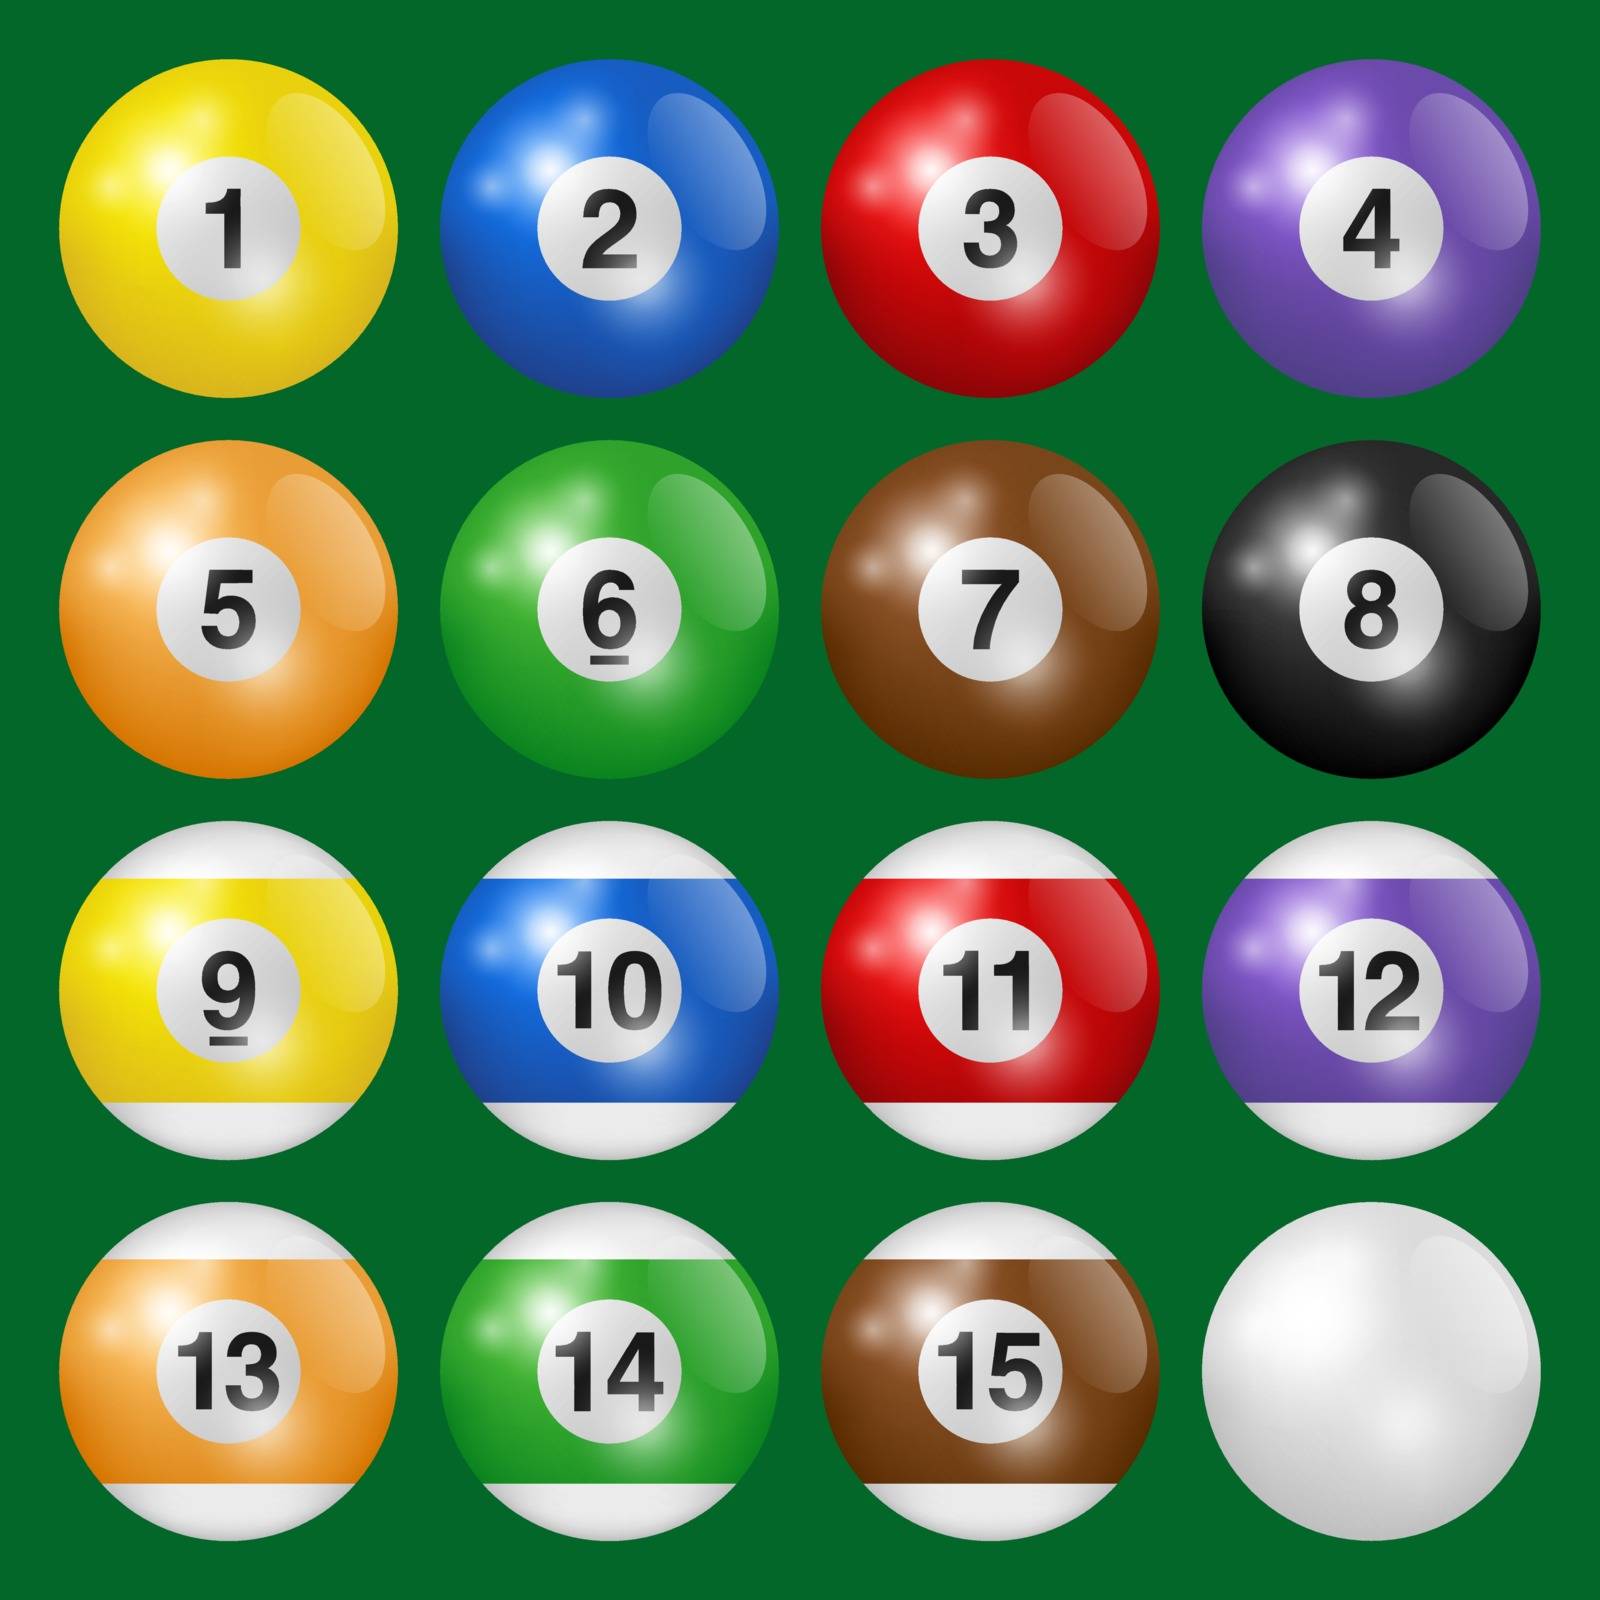 Billiard, pool and snooker balls collection. Set of billiard balls isolated on green background. Vector illustration.